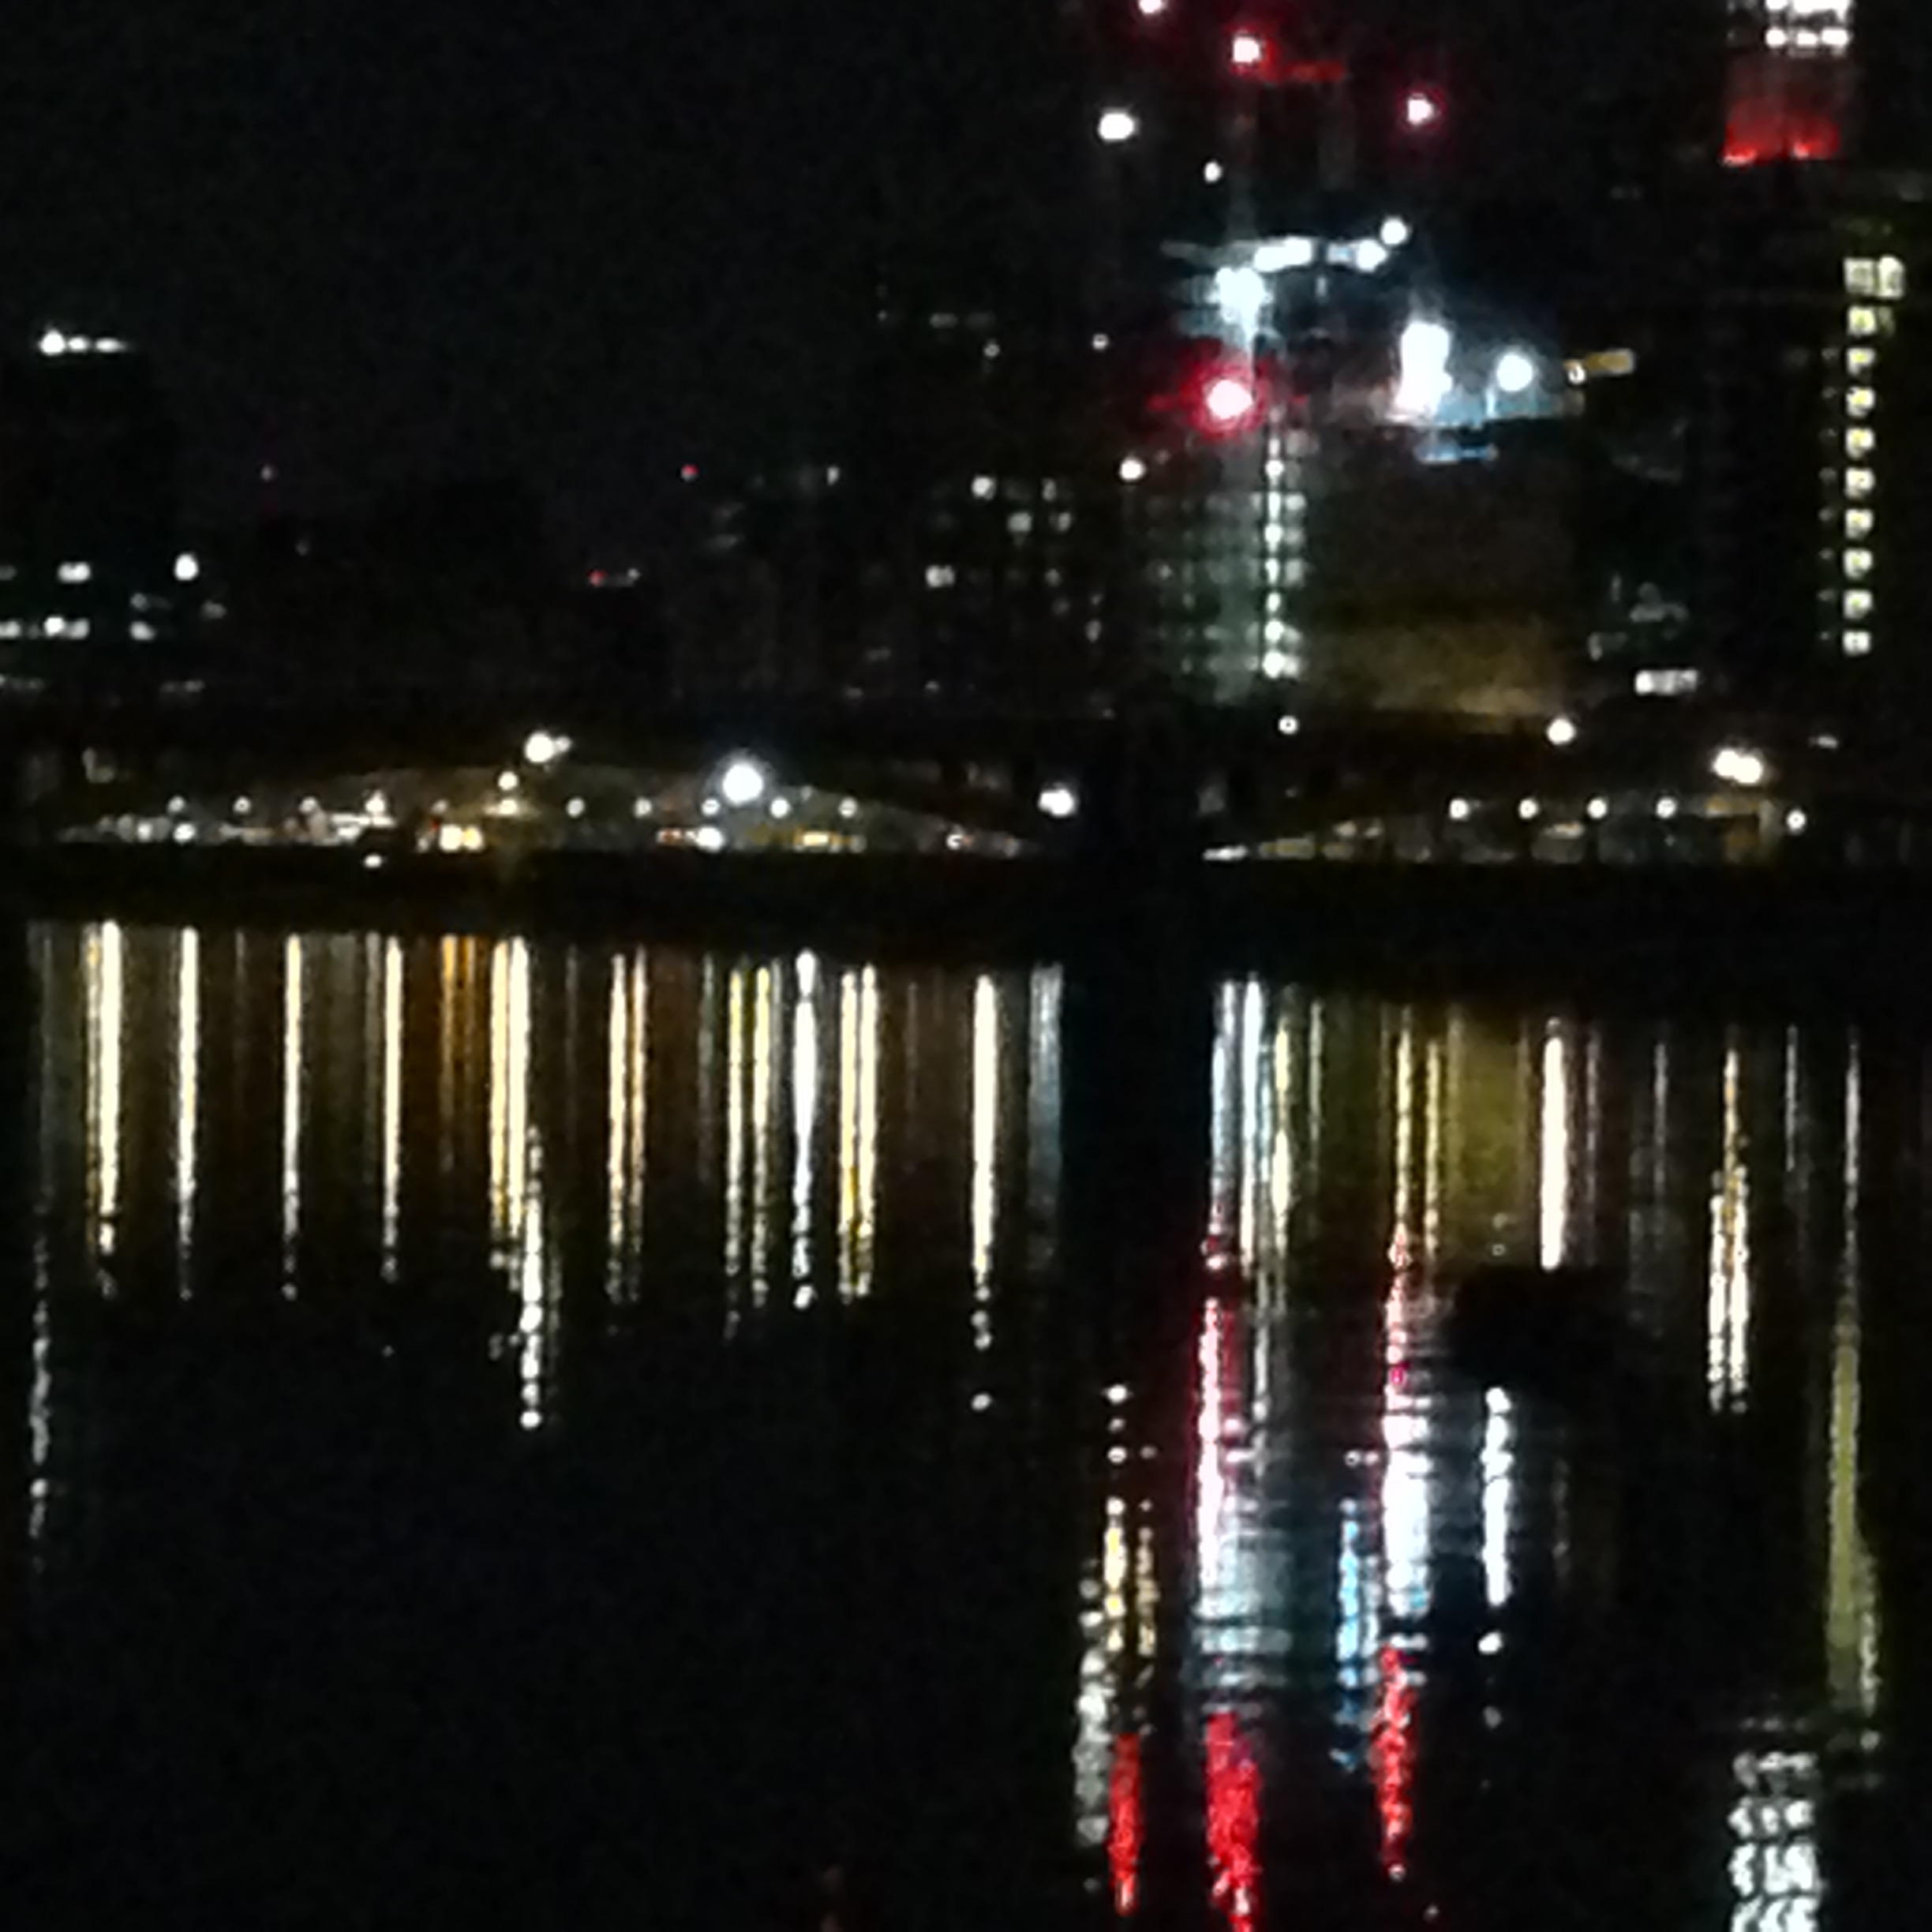 Light reflecting on The River Thames, Battersea.